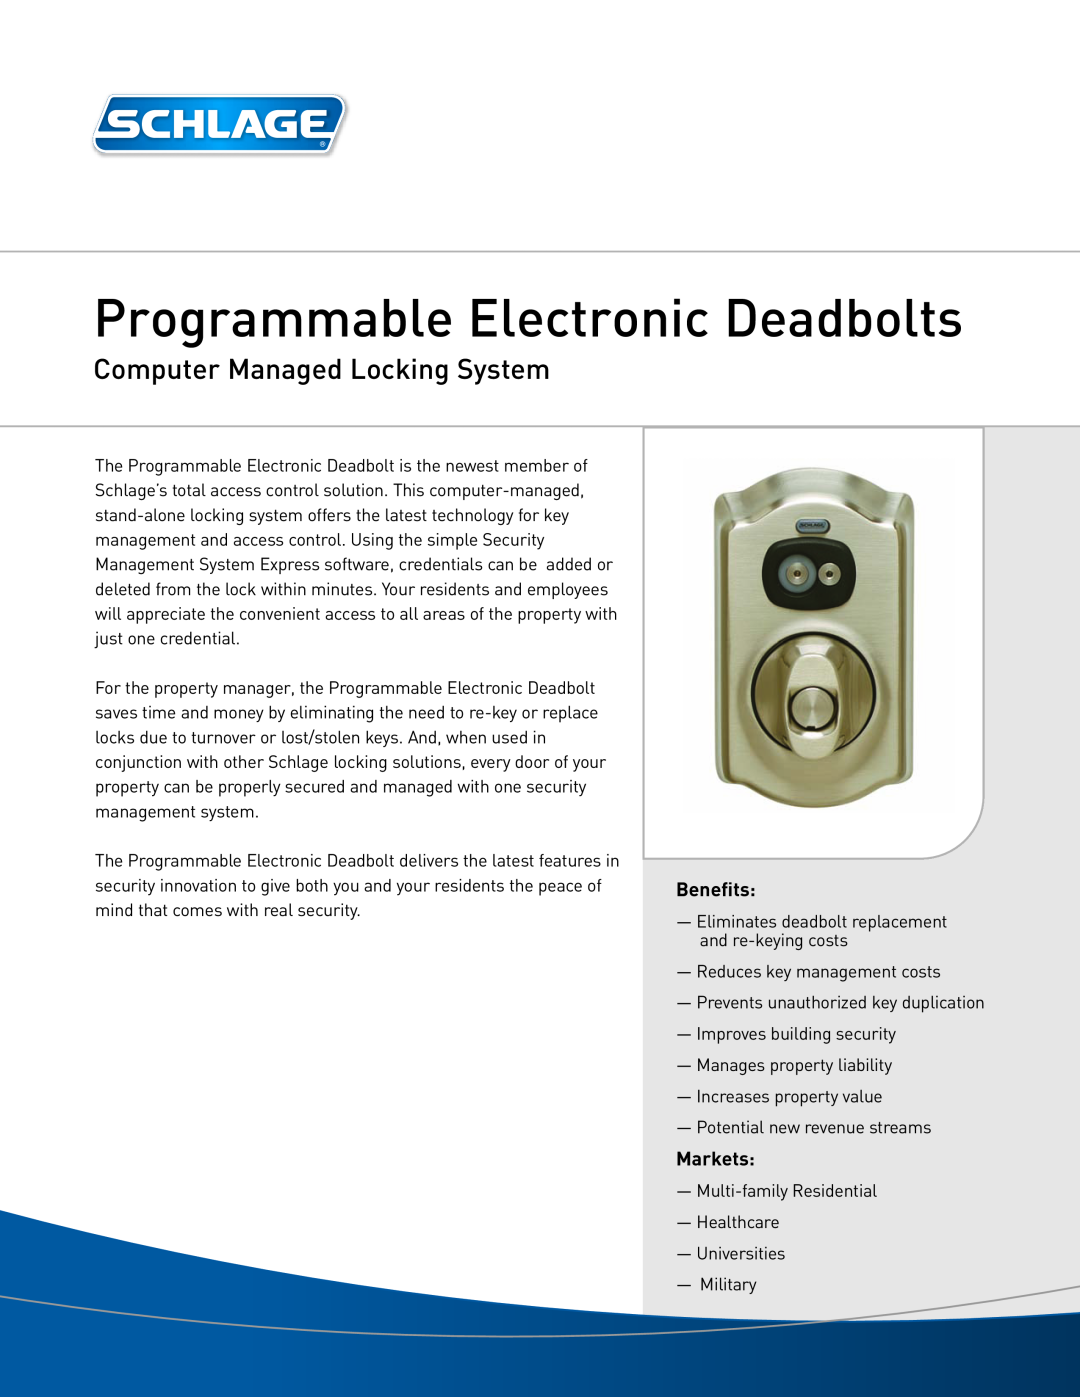 Schlage BE367, 620, 625, 716 manual Programmable Electronic Deadbolts, Computer Managed Locking System, Benefits, Markets 